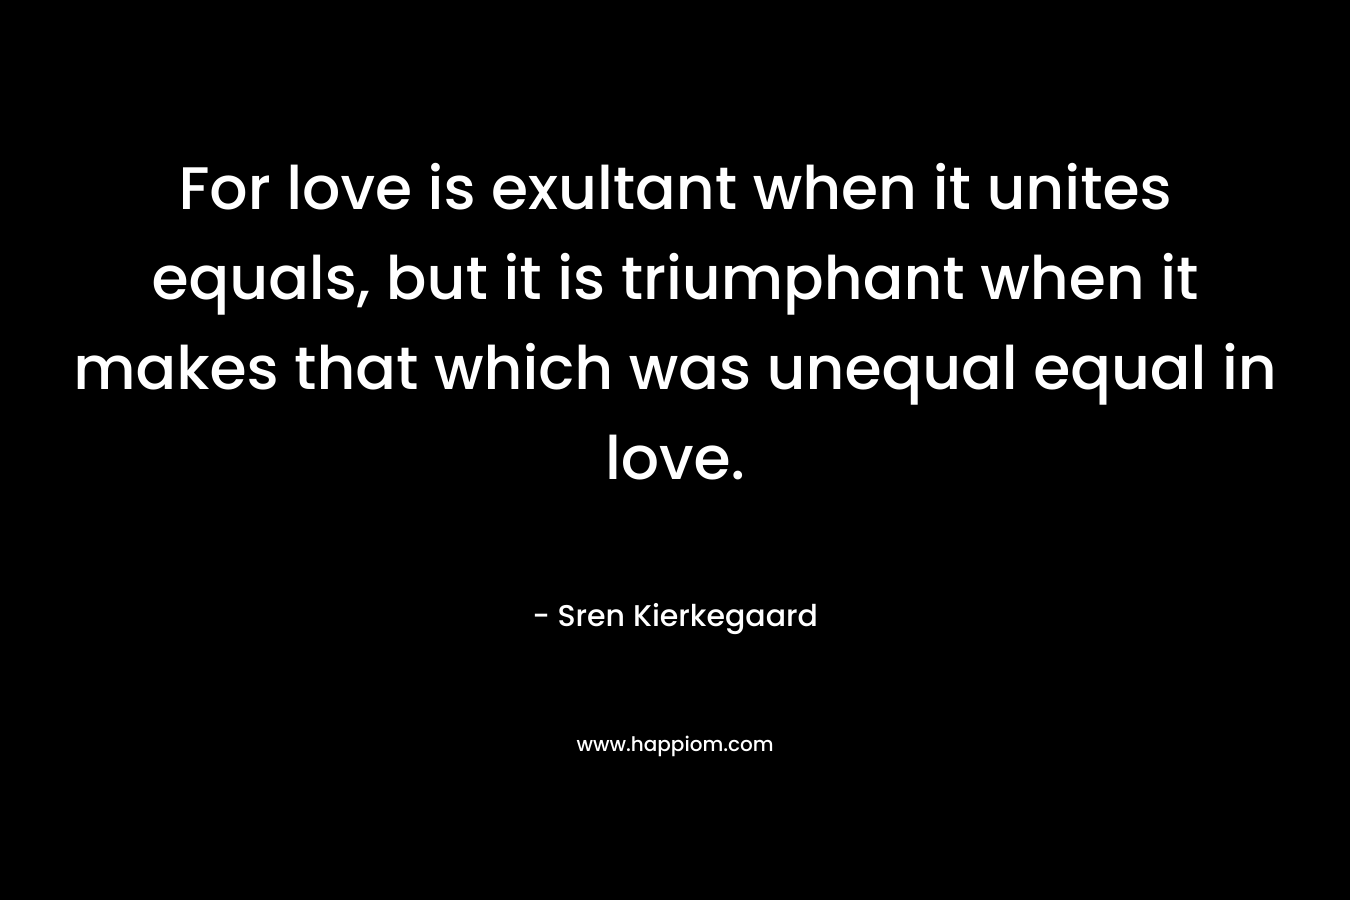 For love is exultant when it unites equals, but it is triumphant when it makes that which was unequal equal in love. – Sren Kierkegaard